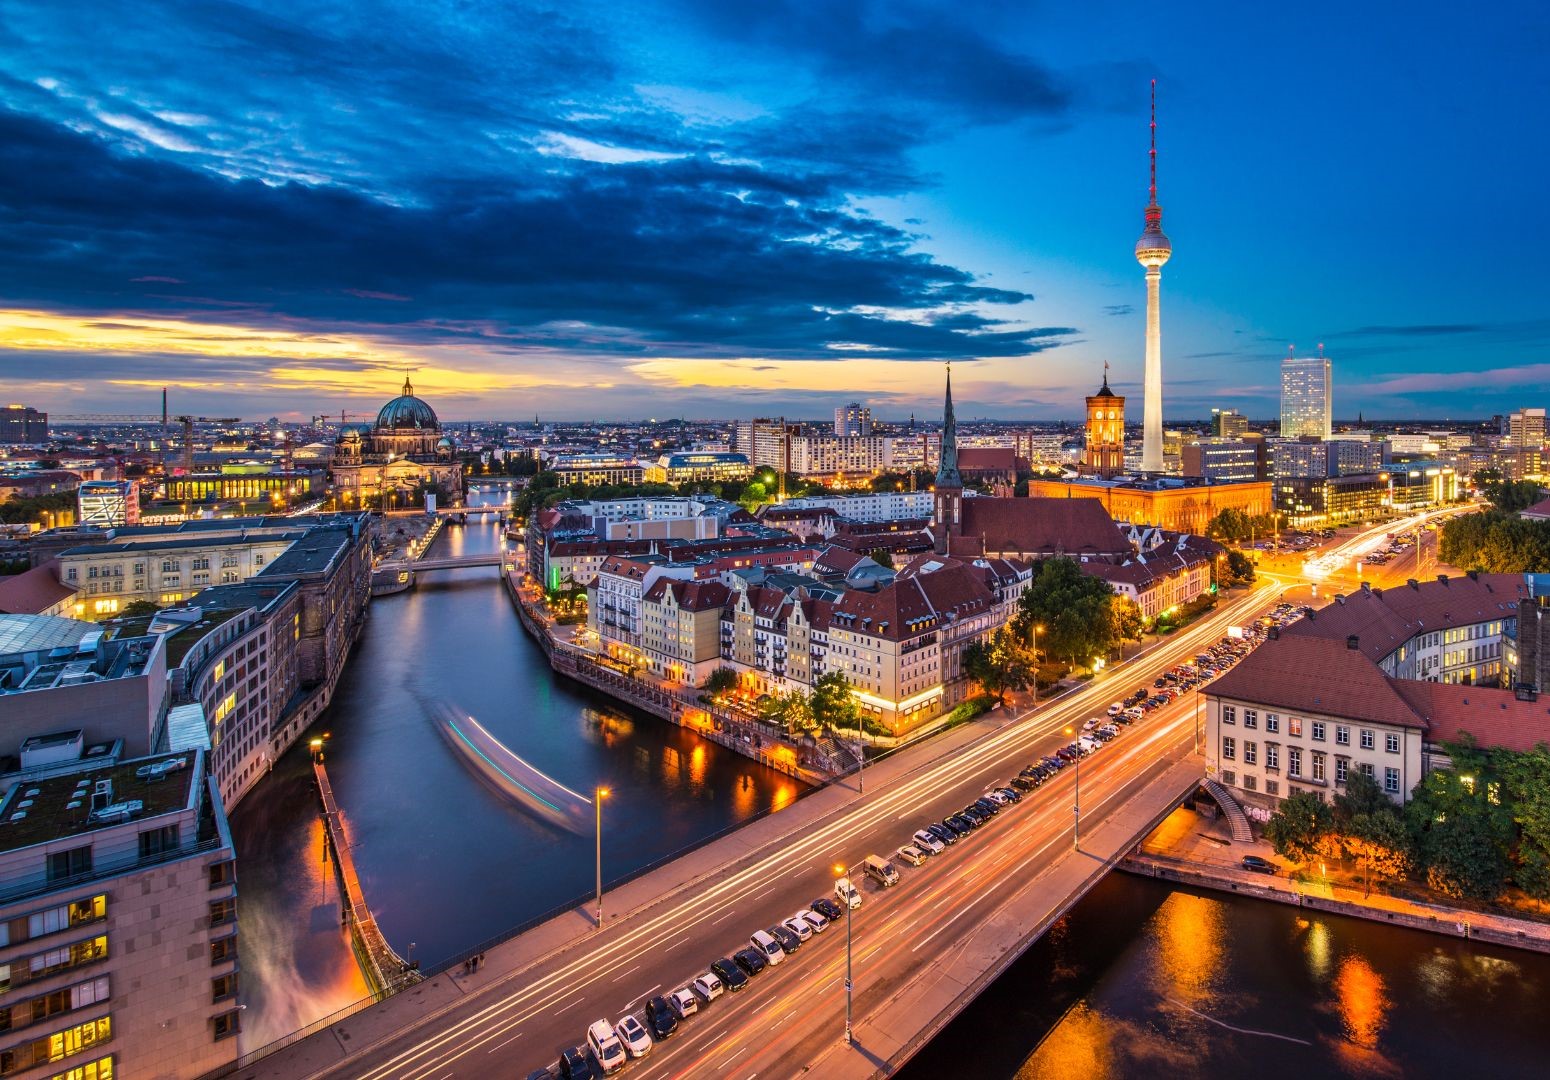 Berlin is known for its cutting-edge art scene and dynamic nightlife